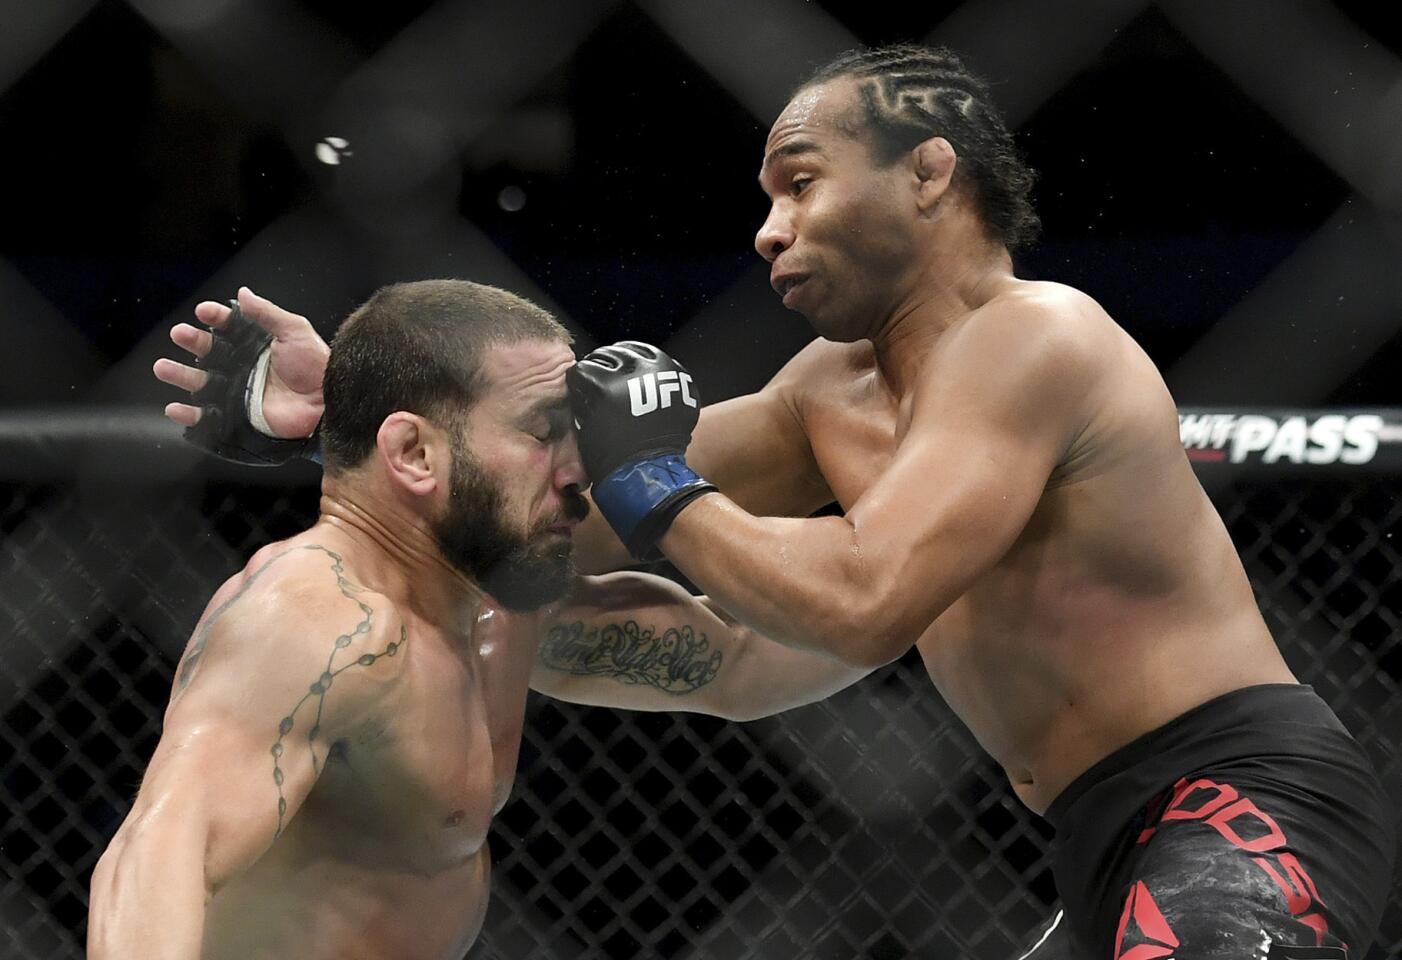 John Dodson, right, punches Jimmie Rivera during their bantamweight mixed martial arts bout at UFC 228 on Saturday, Sept. 8, 2018, in Dallas. (AP Photo/Jeffrey McWhorter)